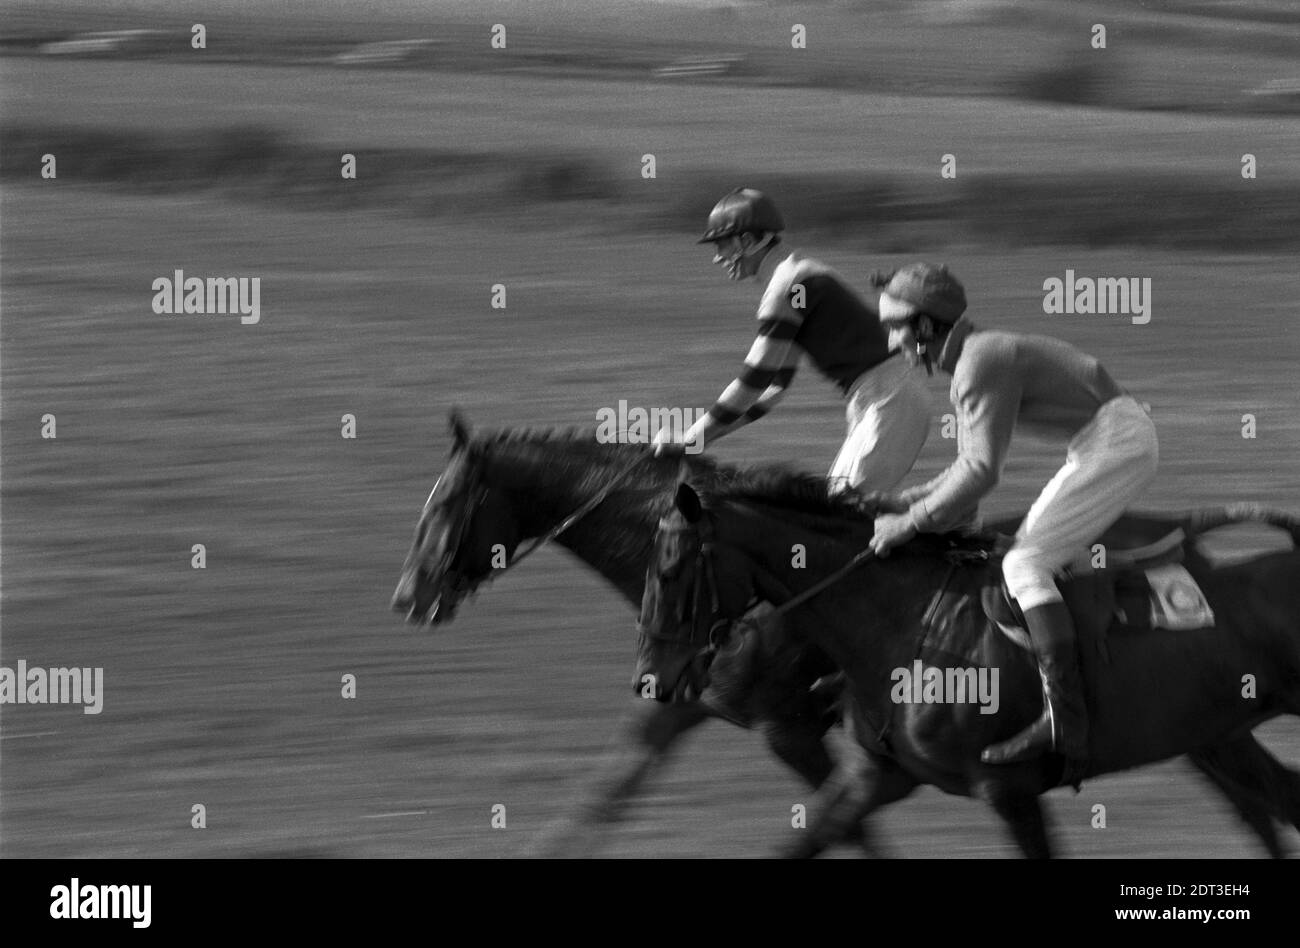 UK, England, Devonshire, Buckfastleigh, 1972. Point-to-Point races were held at  Dean Court on the Dean Marshes, close to the A38 between Plymouth and Exeter. Two competing riders given an impression of speed in the photograph. Stock Photo